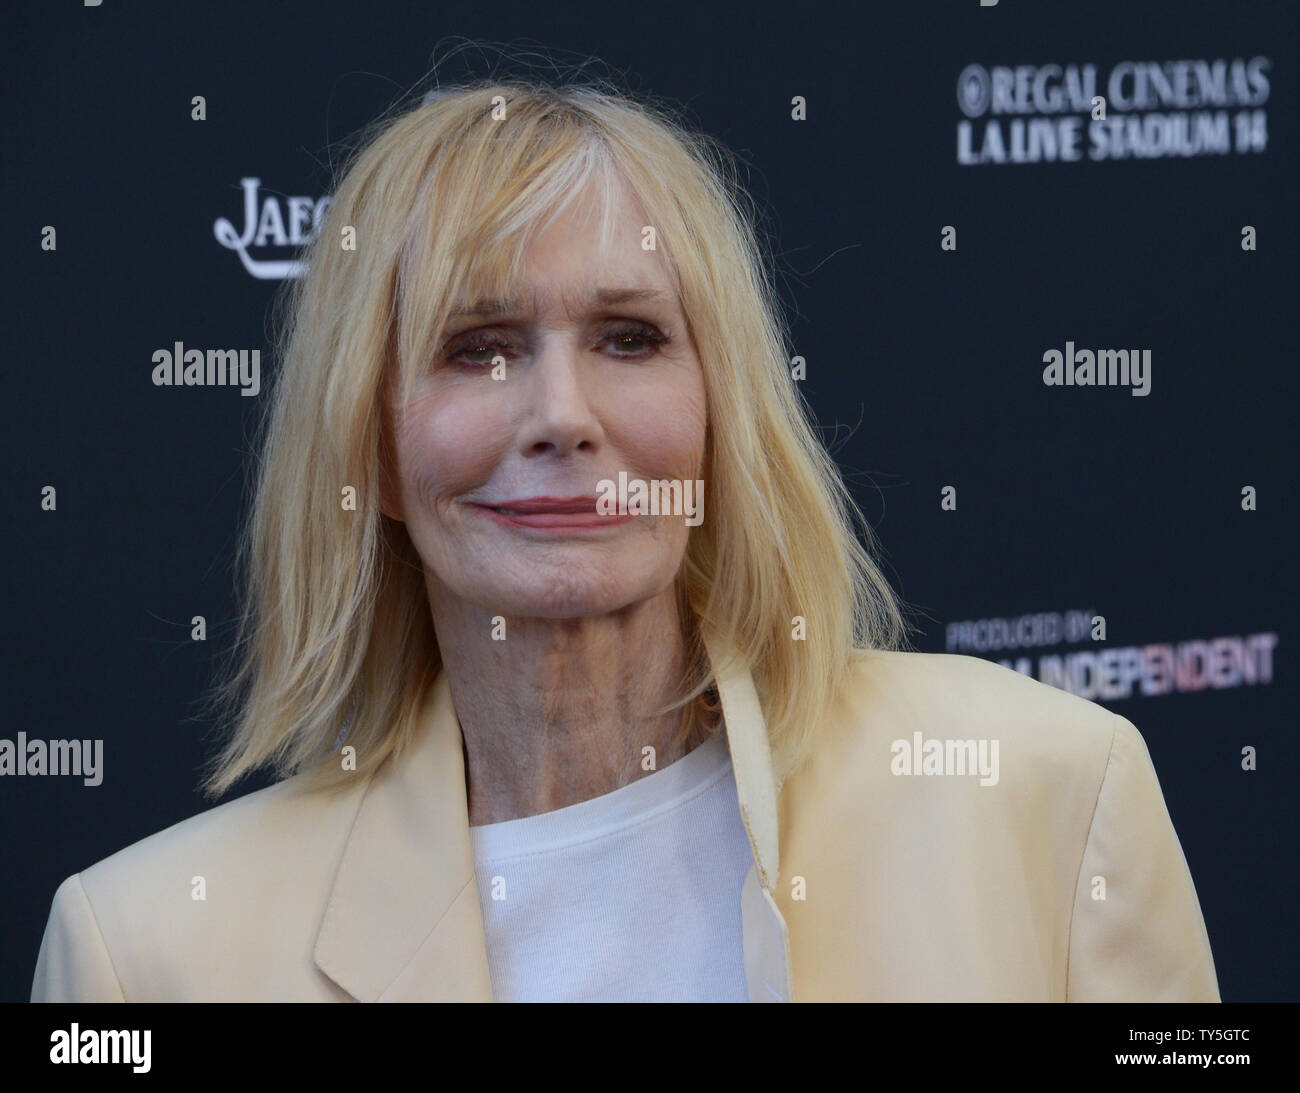 Actress Sally Kellerman attends the premiere of the motion picture comedy 'Grandma' at Regal Cinemas L.A. Live in Los Angeles on June 10, 2015. Storyline: Self-described misanthrope Elle Reid (Tomlin) has her protective bubble burst when her 18-year-old granddaughter, Sage (Garner), shows up needing help. The two of them go on a day-long journey that causes Elle to come to terms with her past and Sage to confront her future.  Photo by Jim Ruymen/UPI Stock Photo